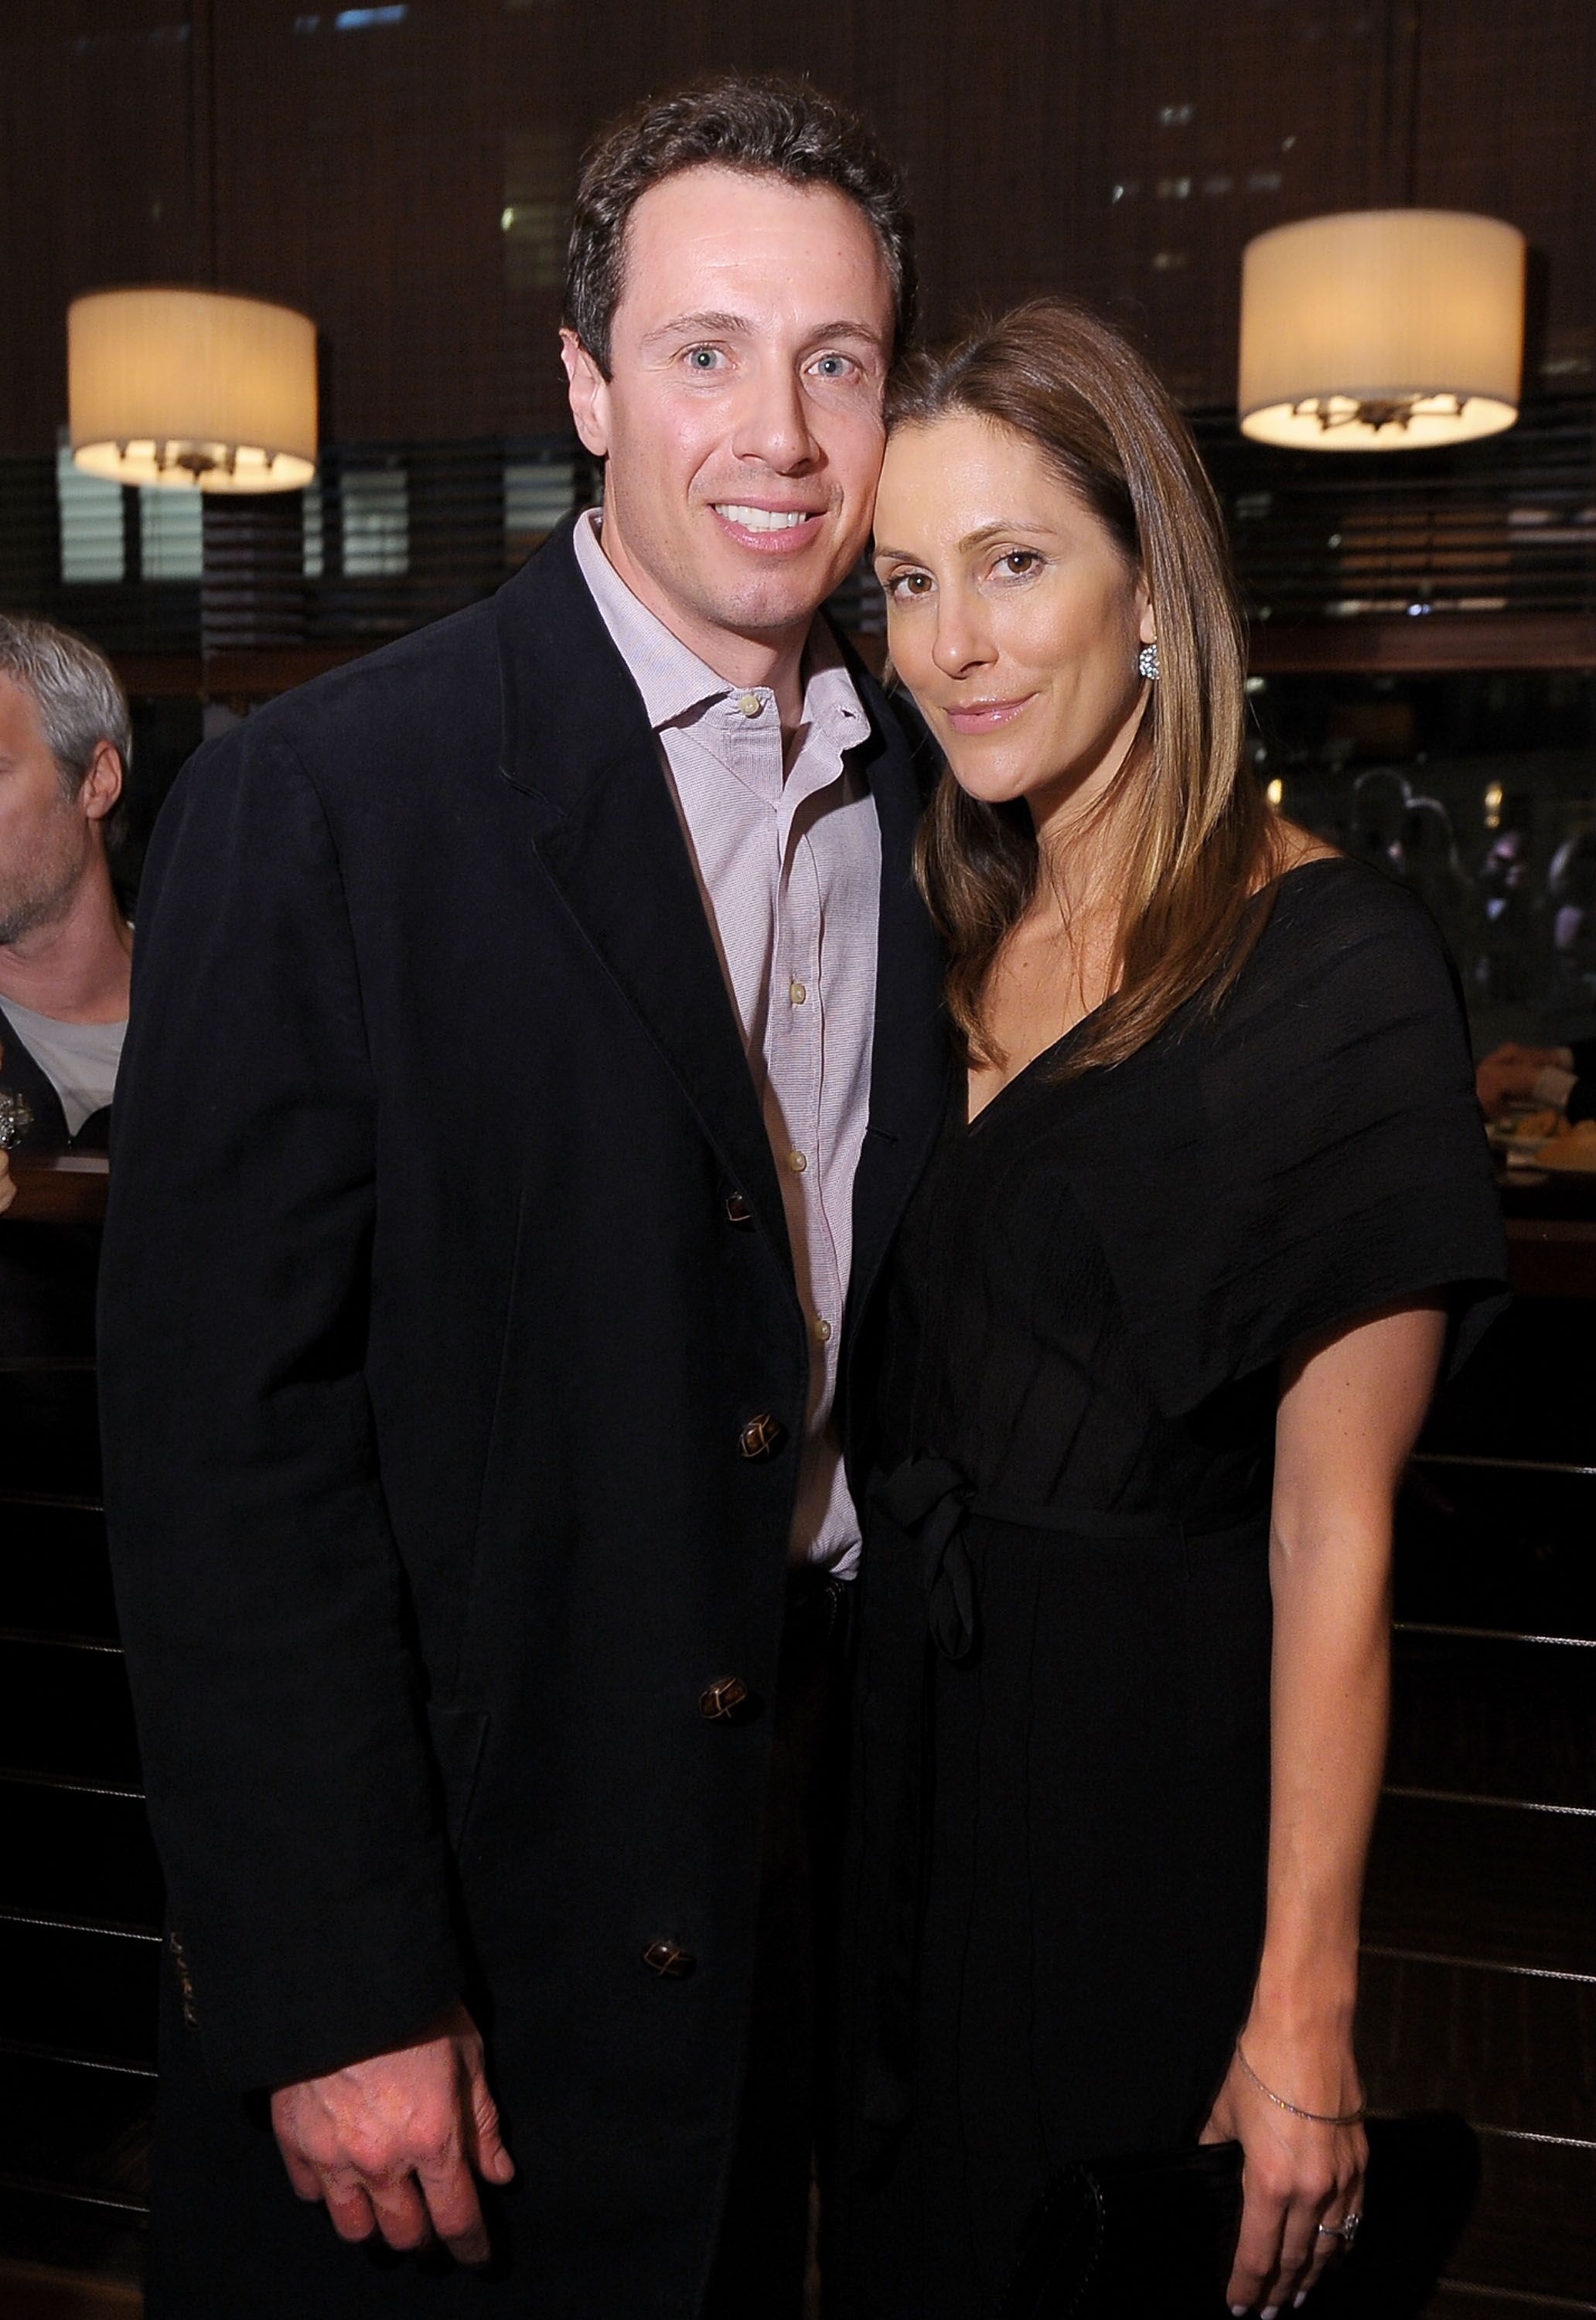 Chris Cuomo and wife, Cristina Greeven, at the HBO documentary screening of "His Way" on March 30, 2011, in New York City | Photo: Michael Loccisano/Getty Images